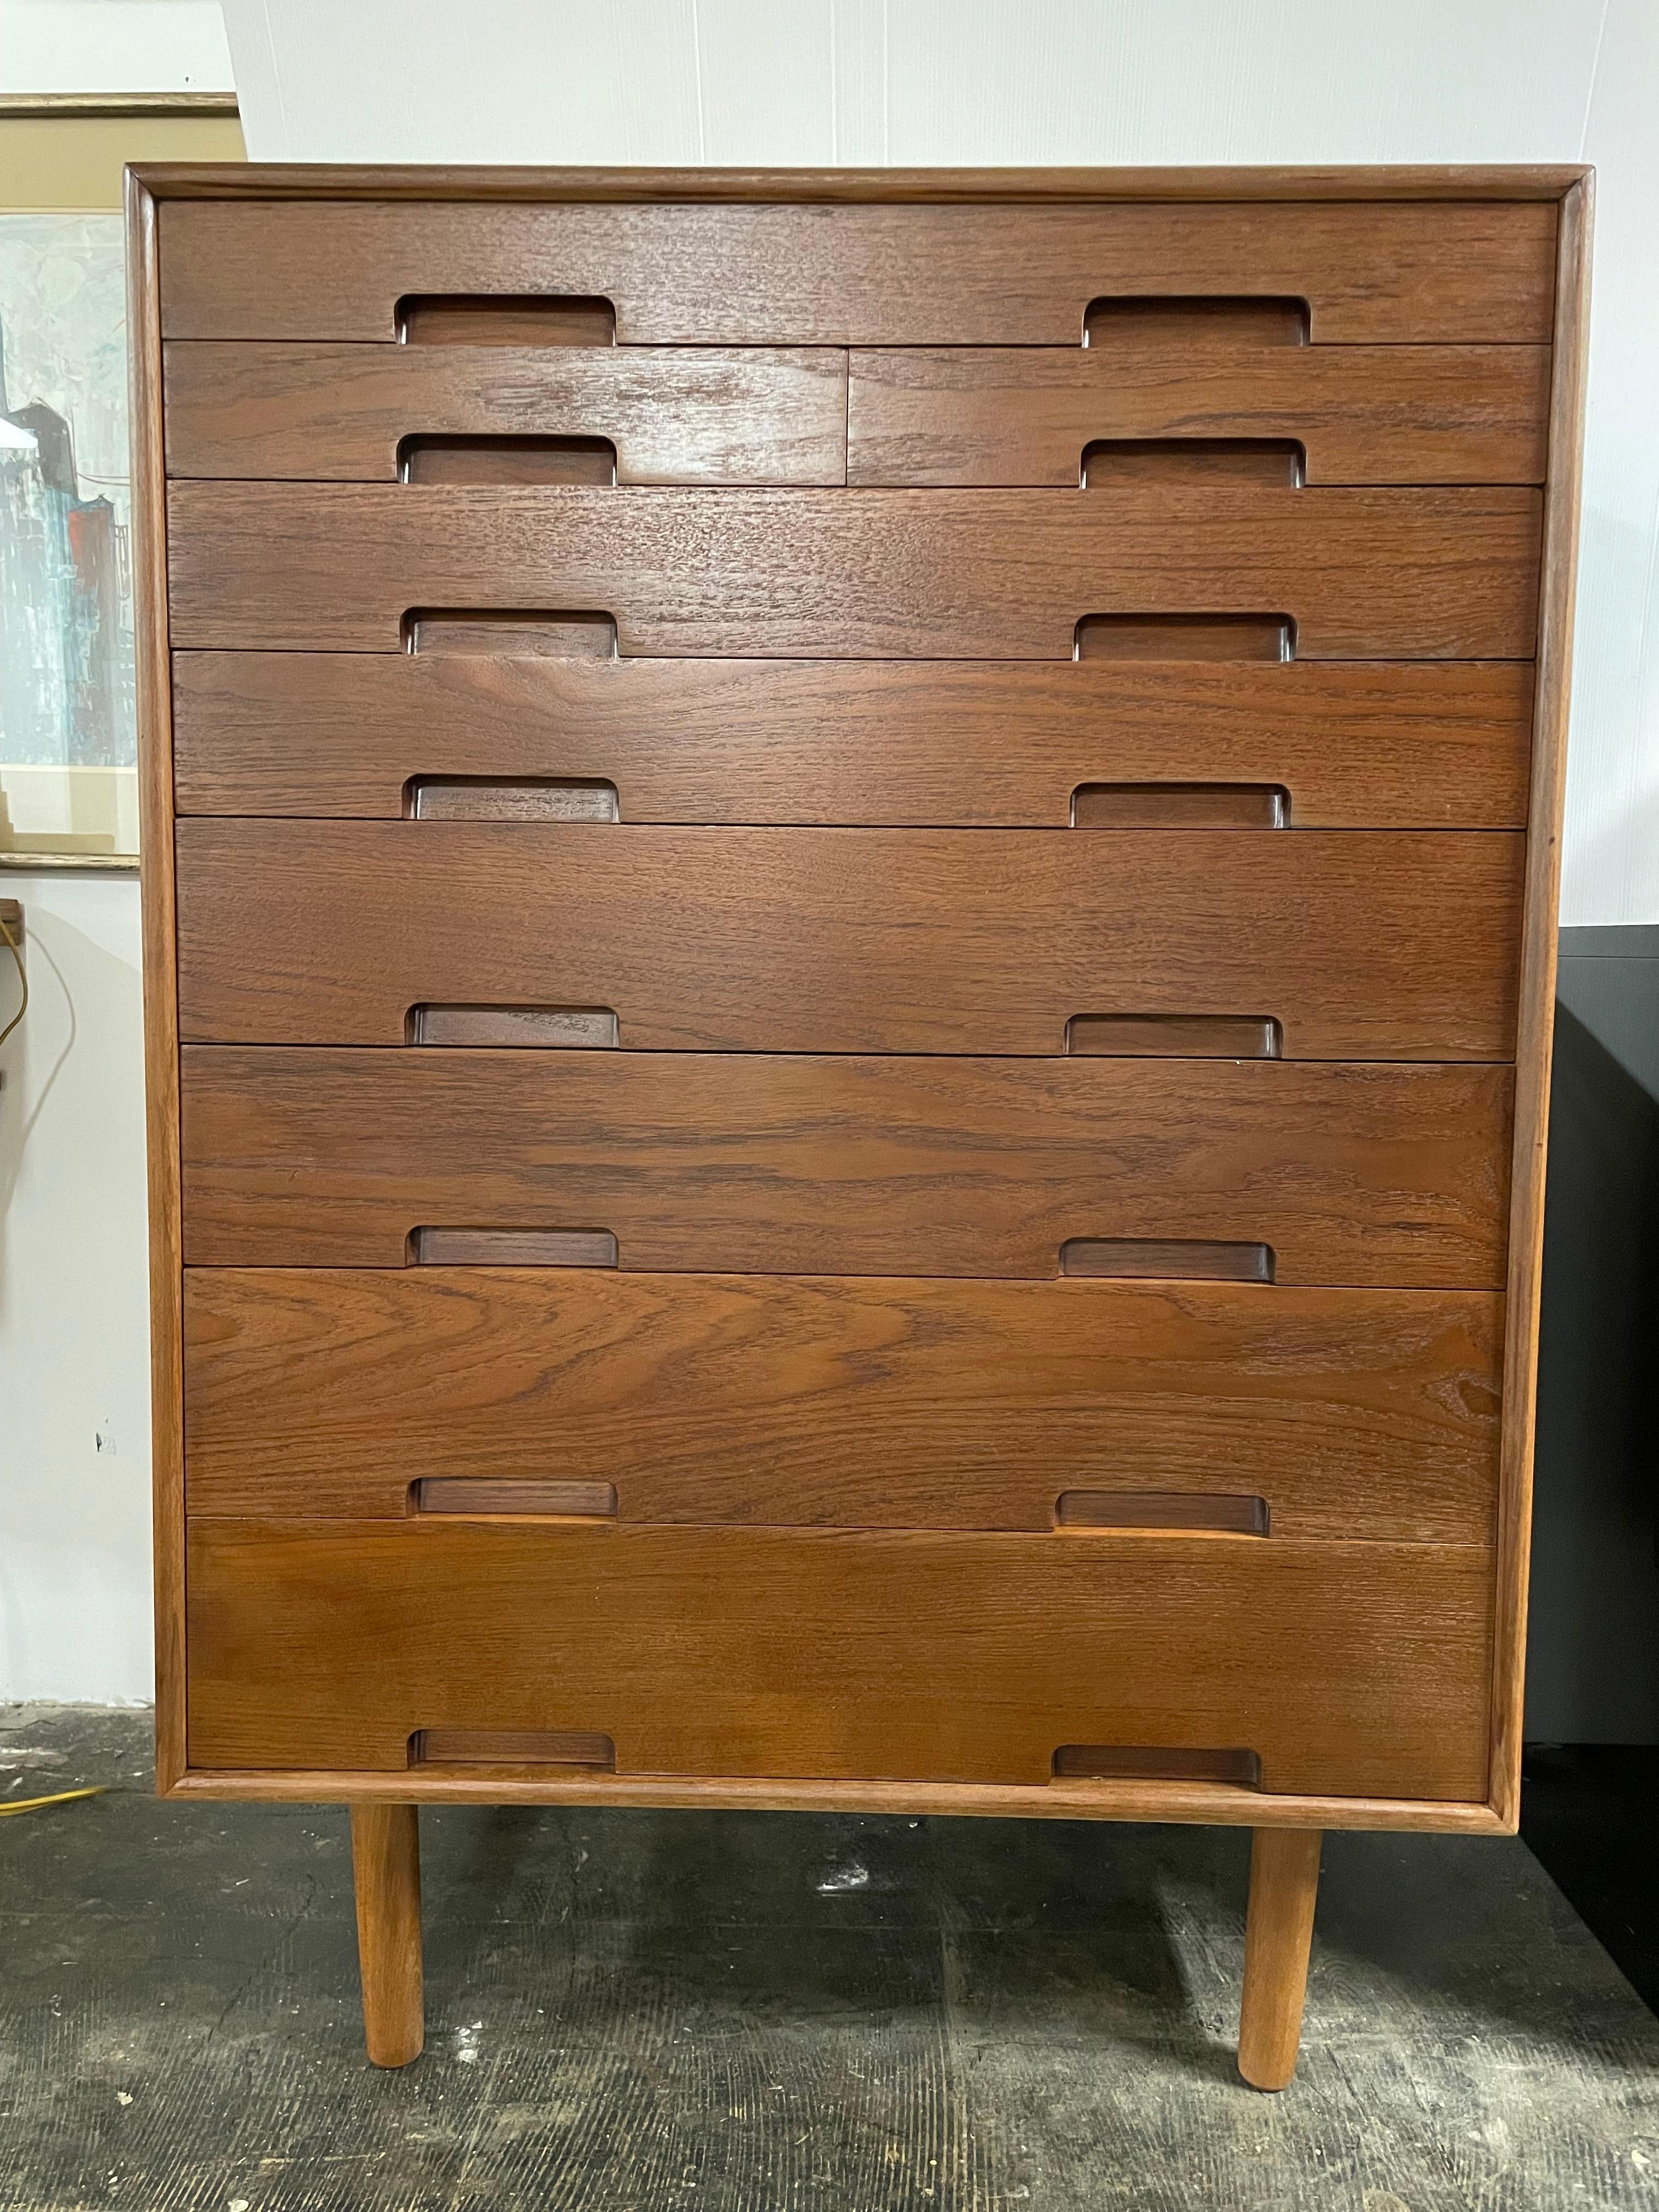 Gorgeous teak Danish highboy dresser. Features 8 rows of drawers in different sizes.